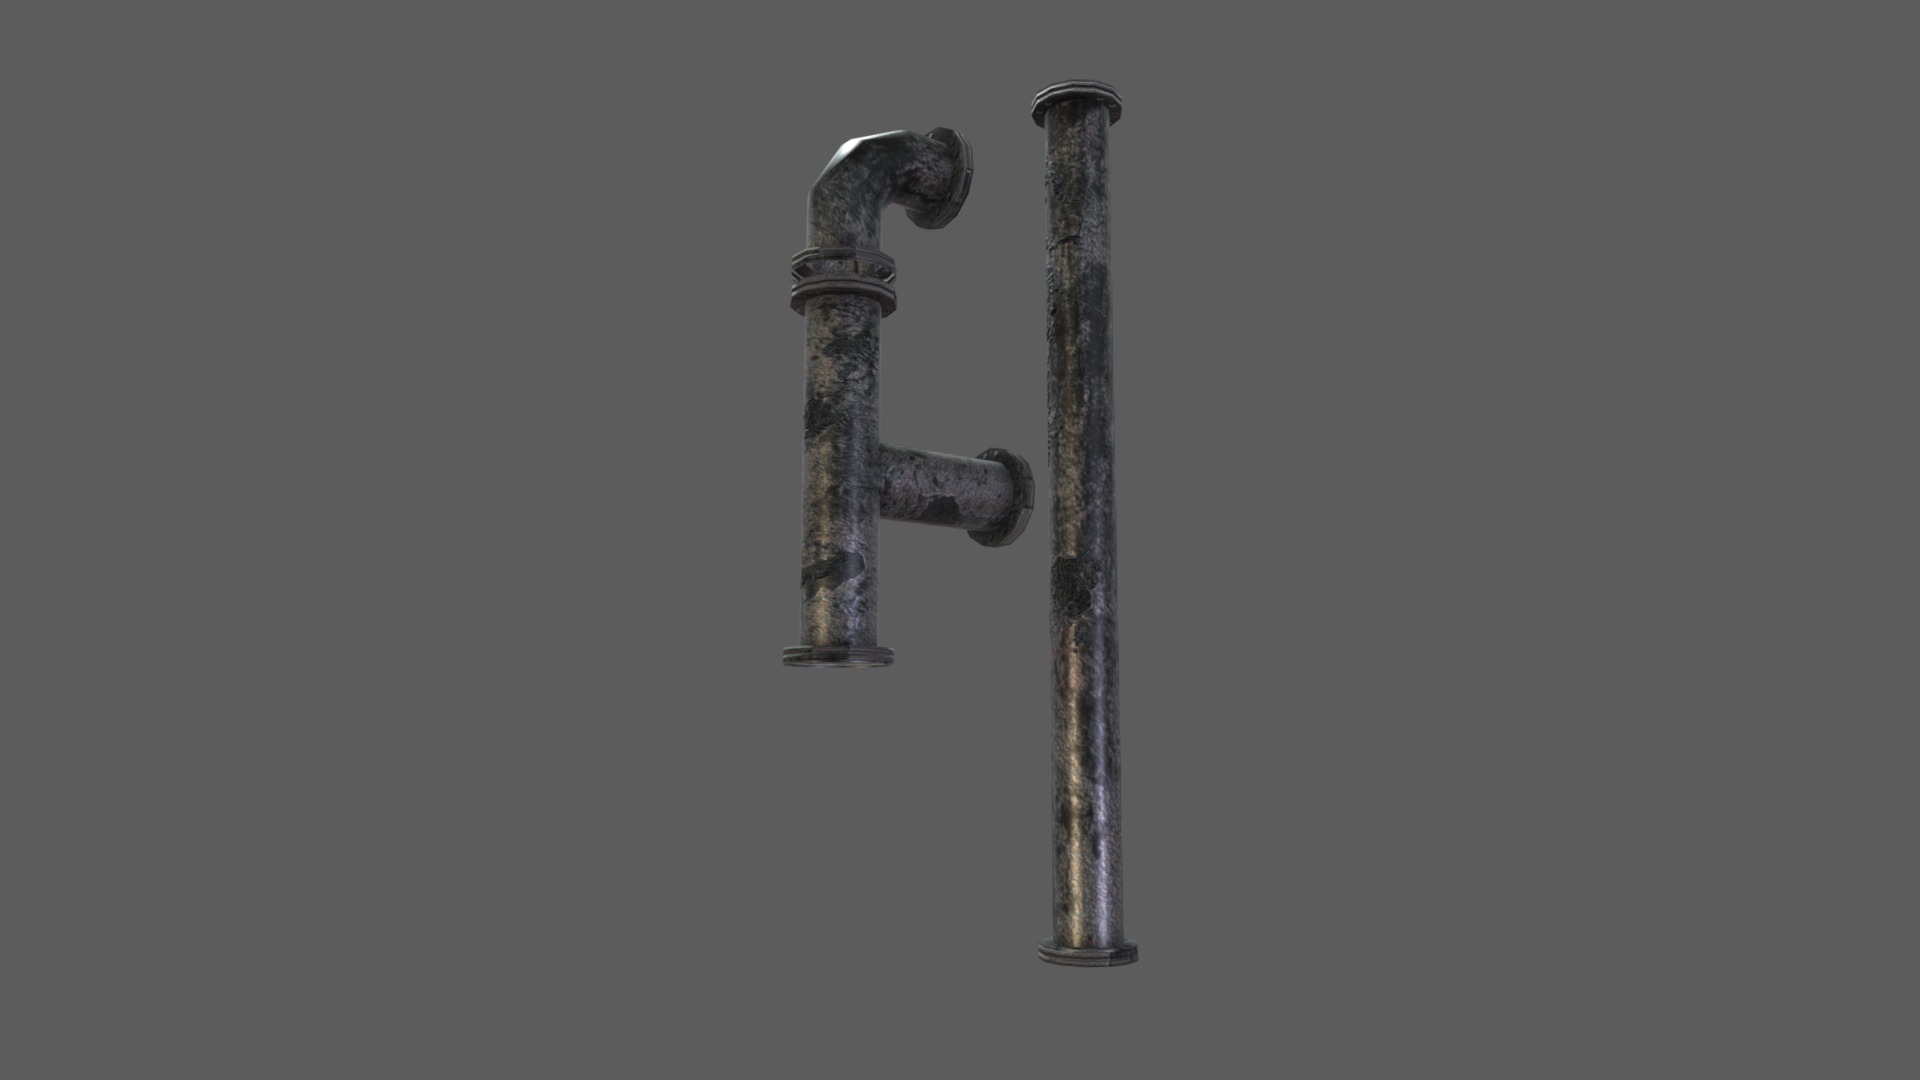 3D model Pipe model - This is a 3D model of the Pipe model. The 3D model is about a close-up of a faucet.